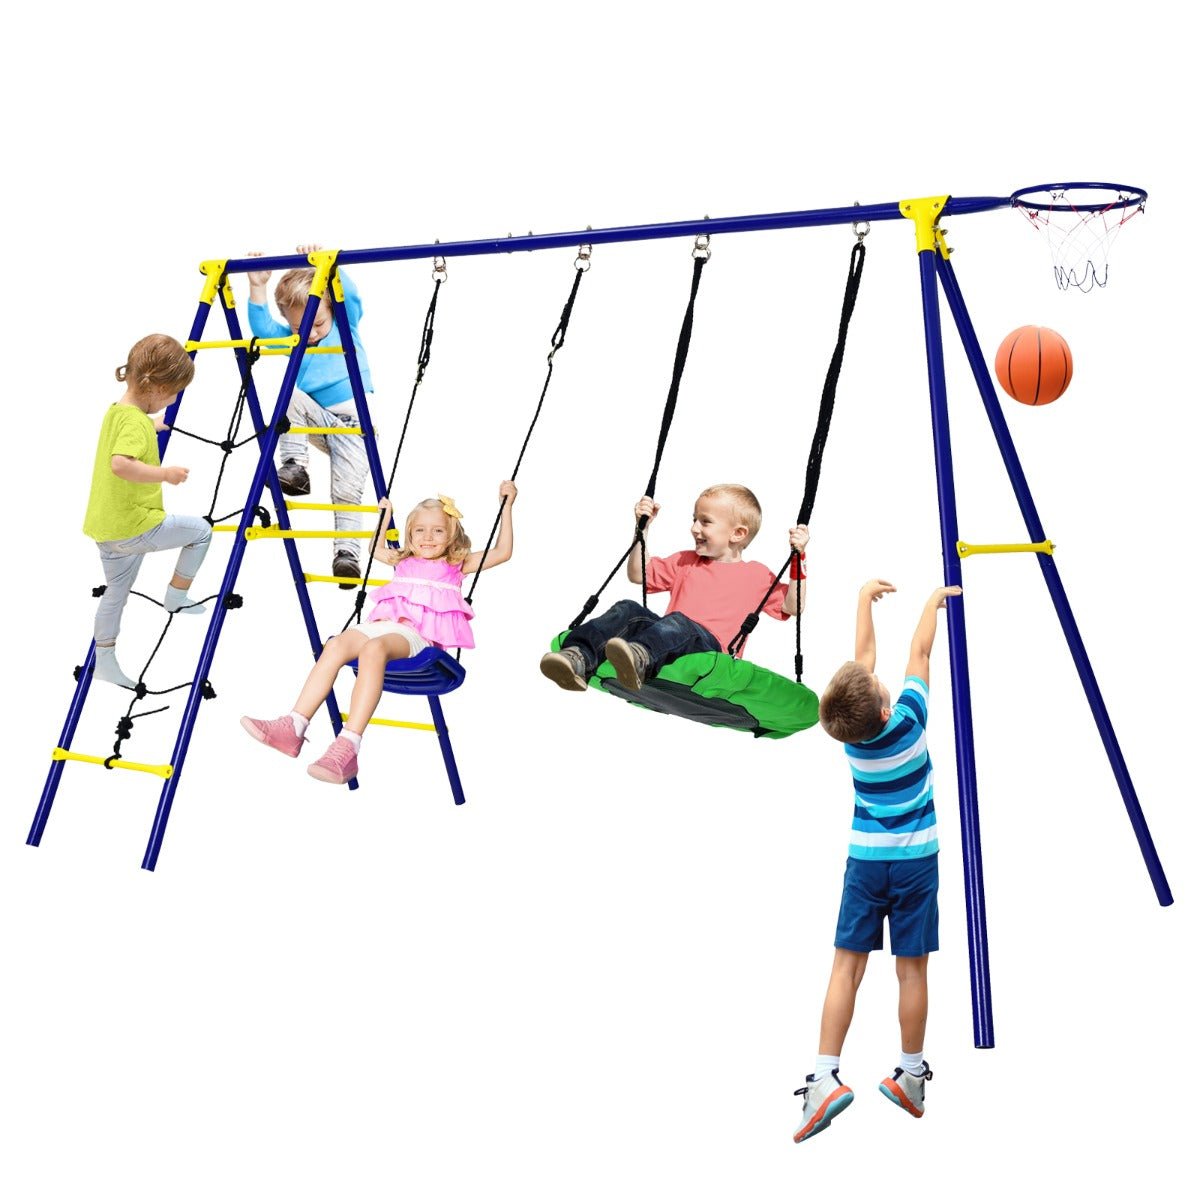 Kids Swing Set with A-Shaped Metal Frame: 5-in-1 Outdoor Delight